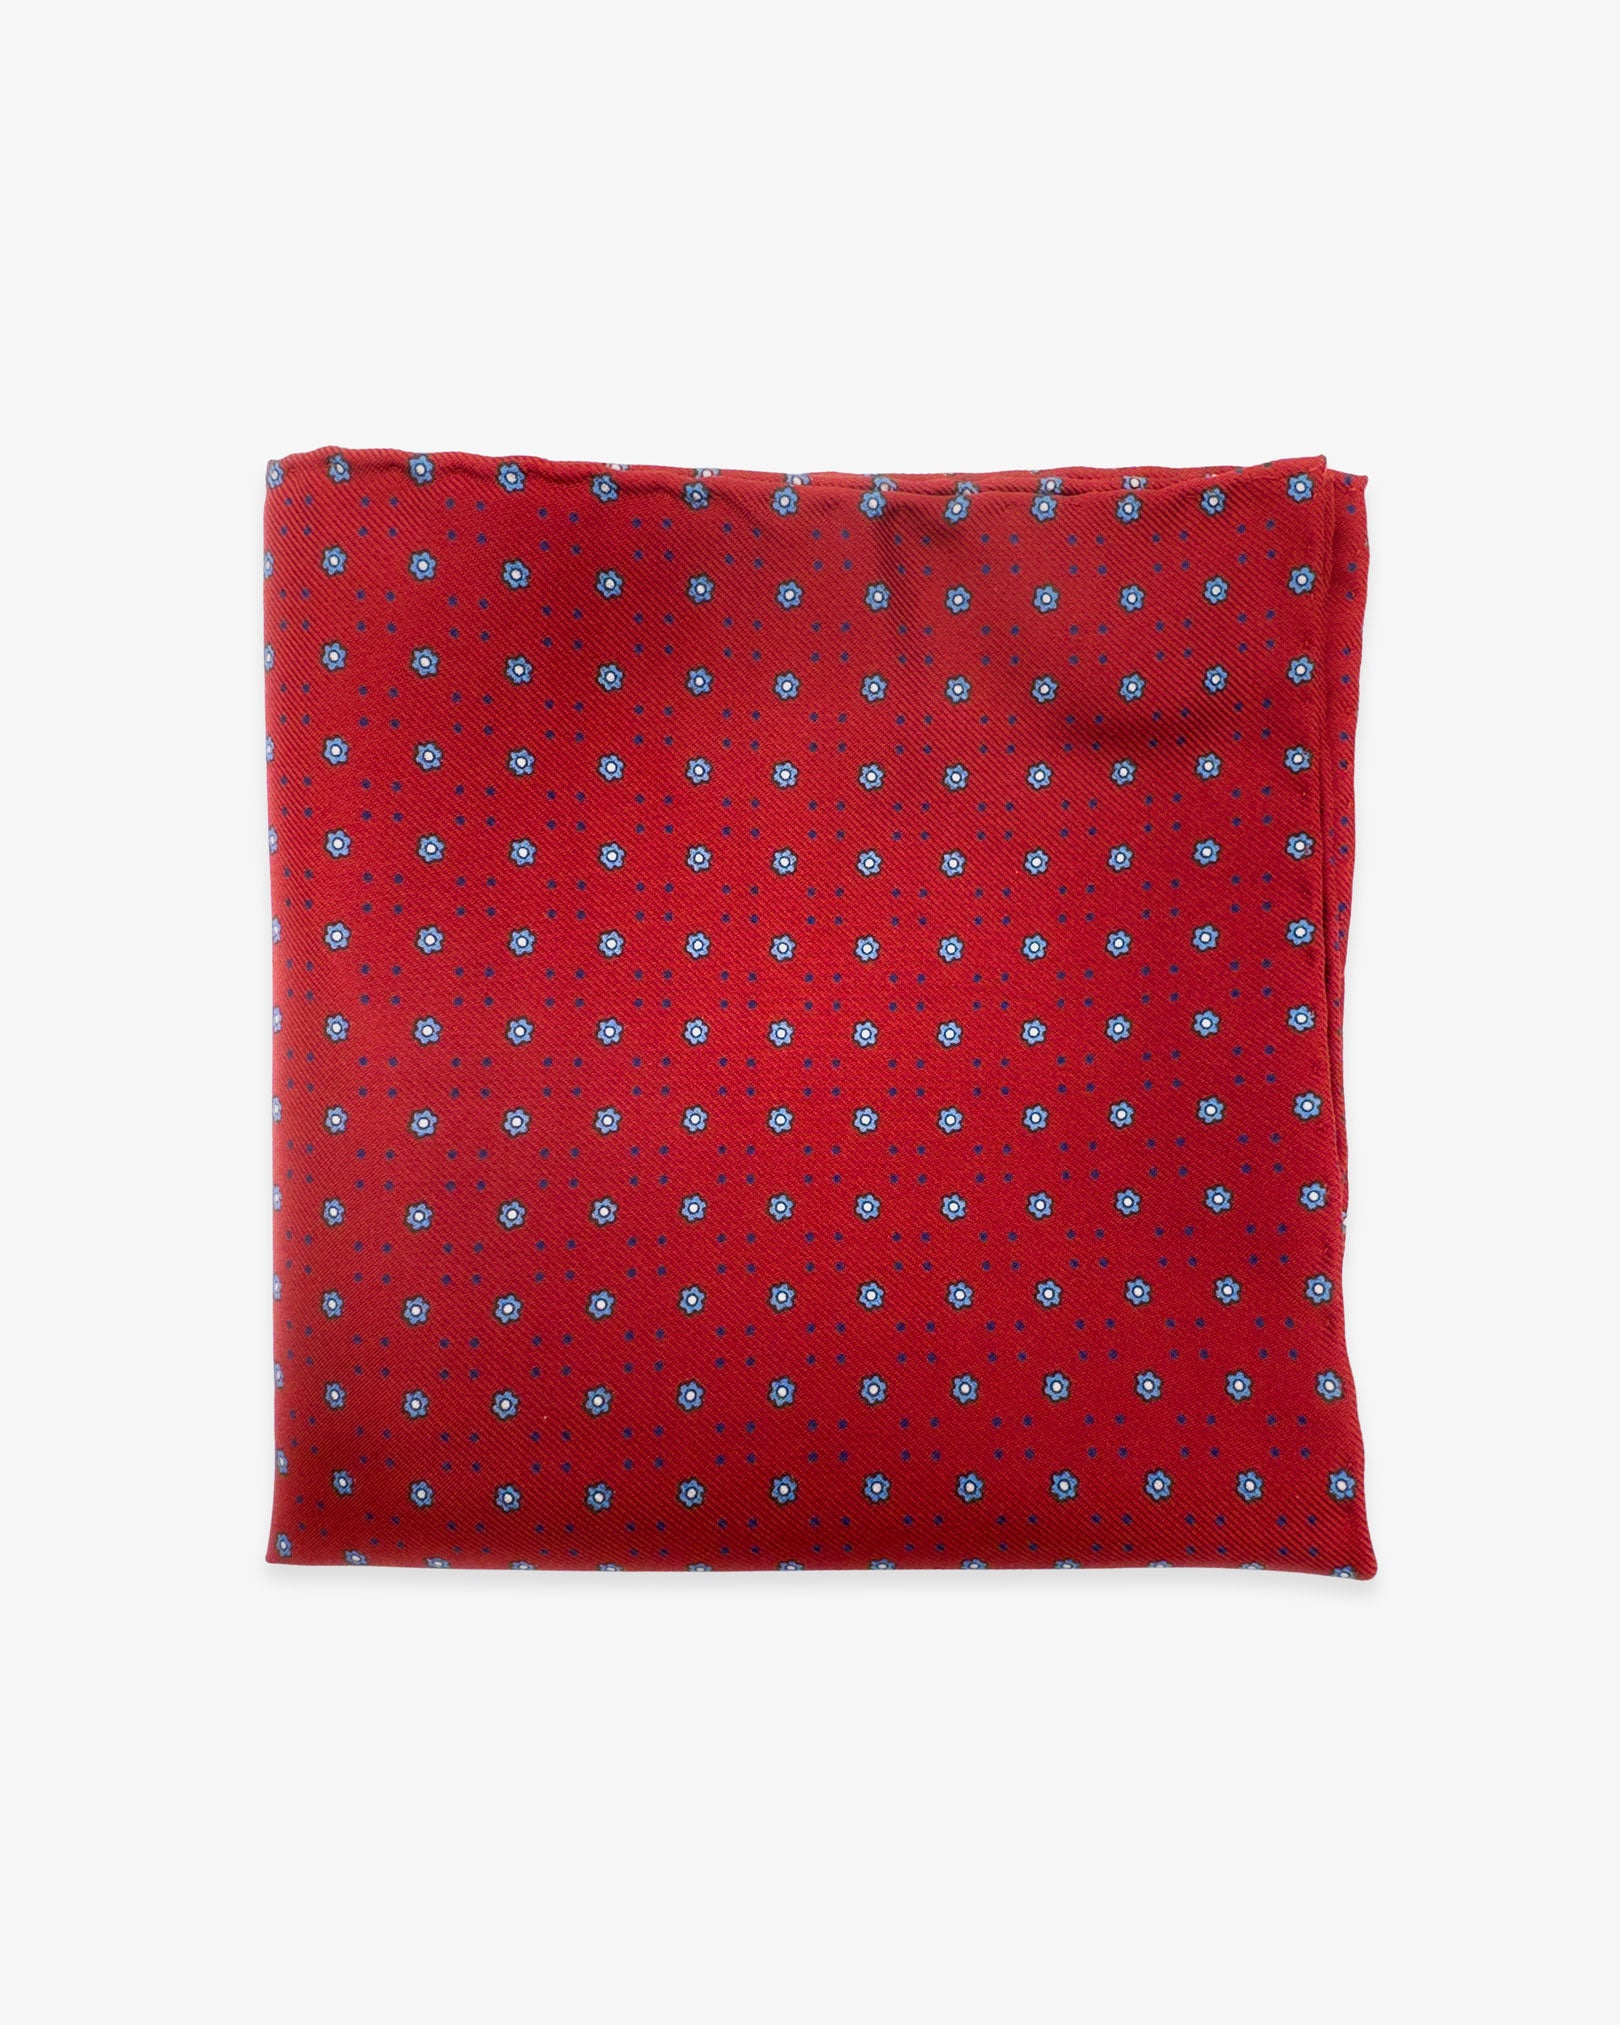 The 'Studley' silk pocket square from SOHO Scarves UK collection. Folded into a quarter, showing the tiny blue floral patterns and dots against a red background.